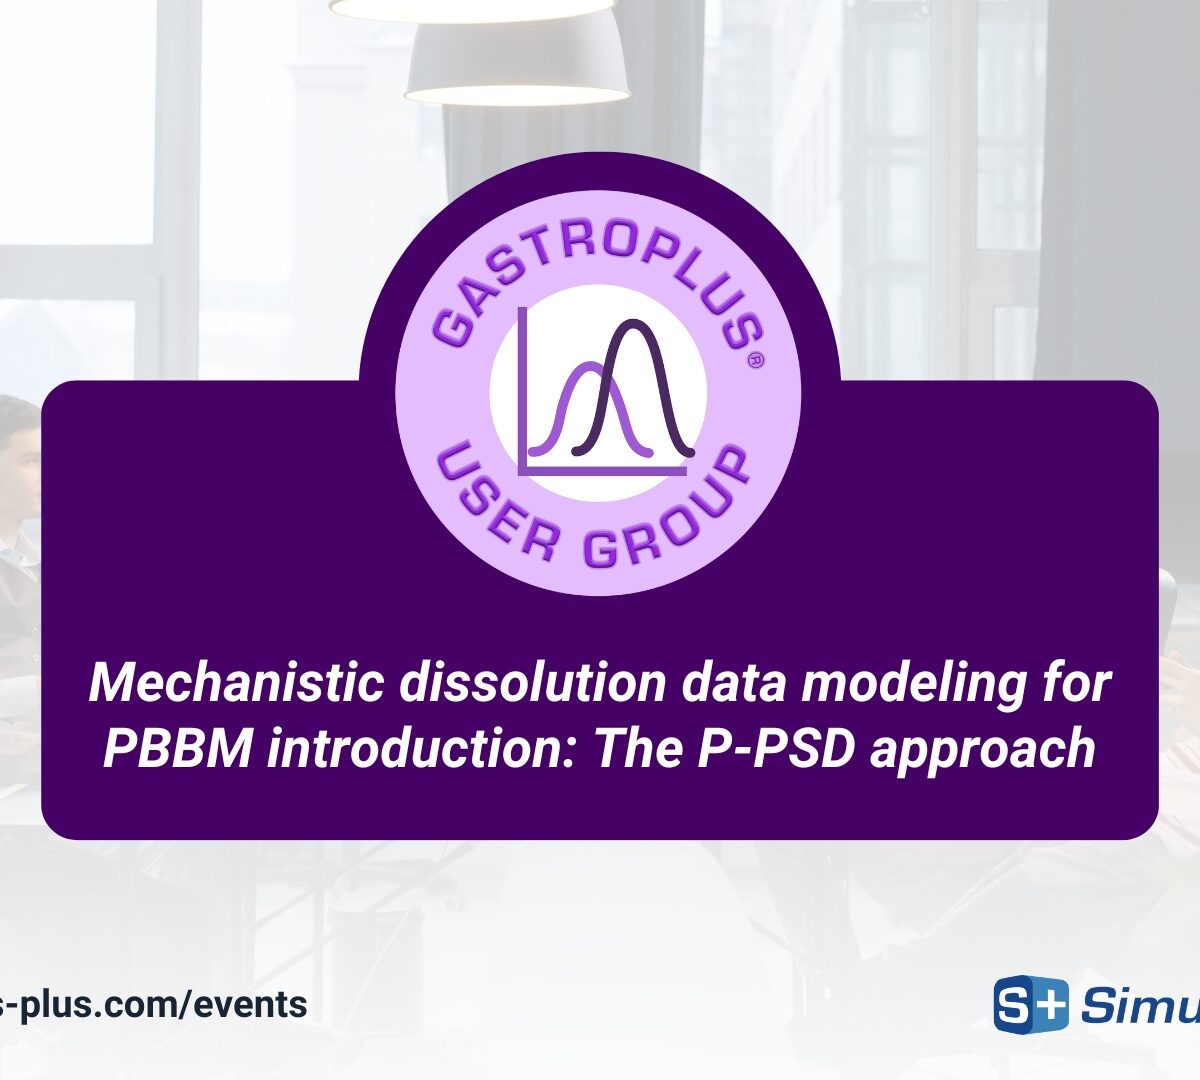 Mechanistic dissolution data modeling for PBBM introduction: The P-PSD approach